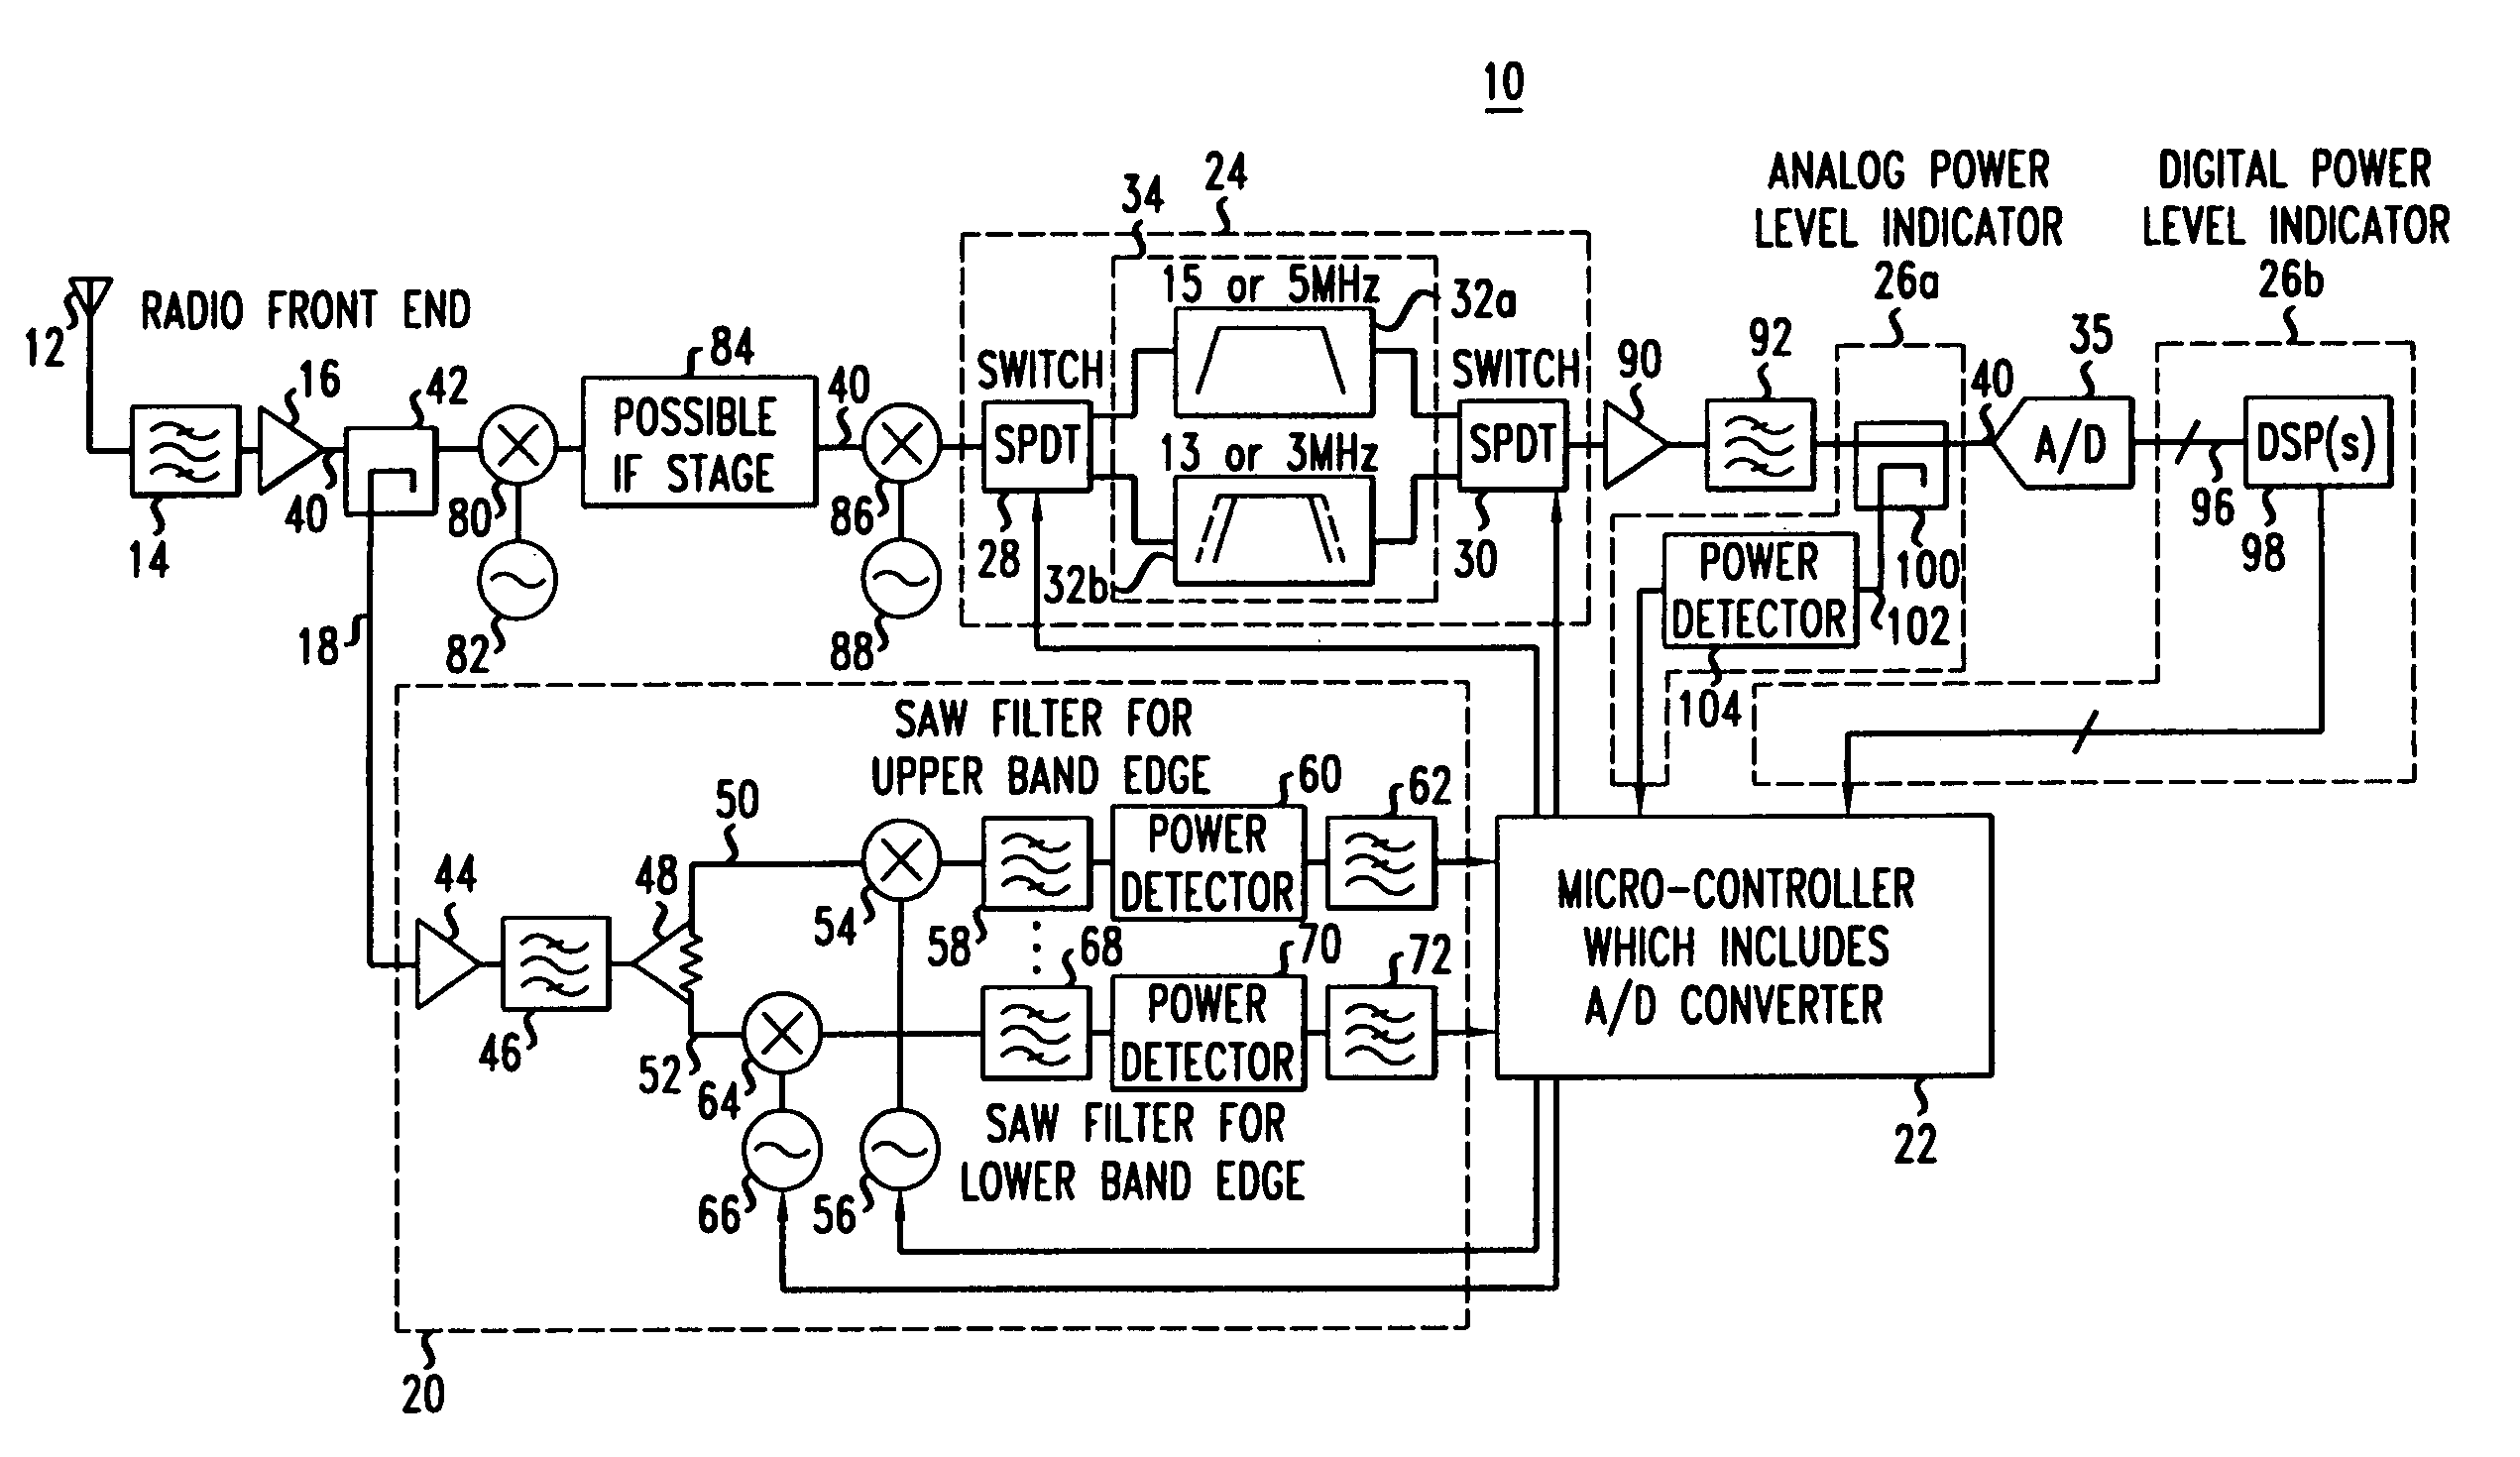 Band edge amplitude reduction system and method